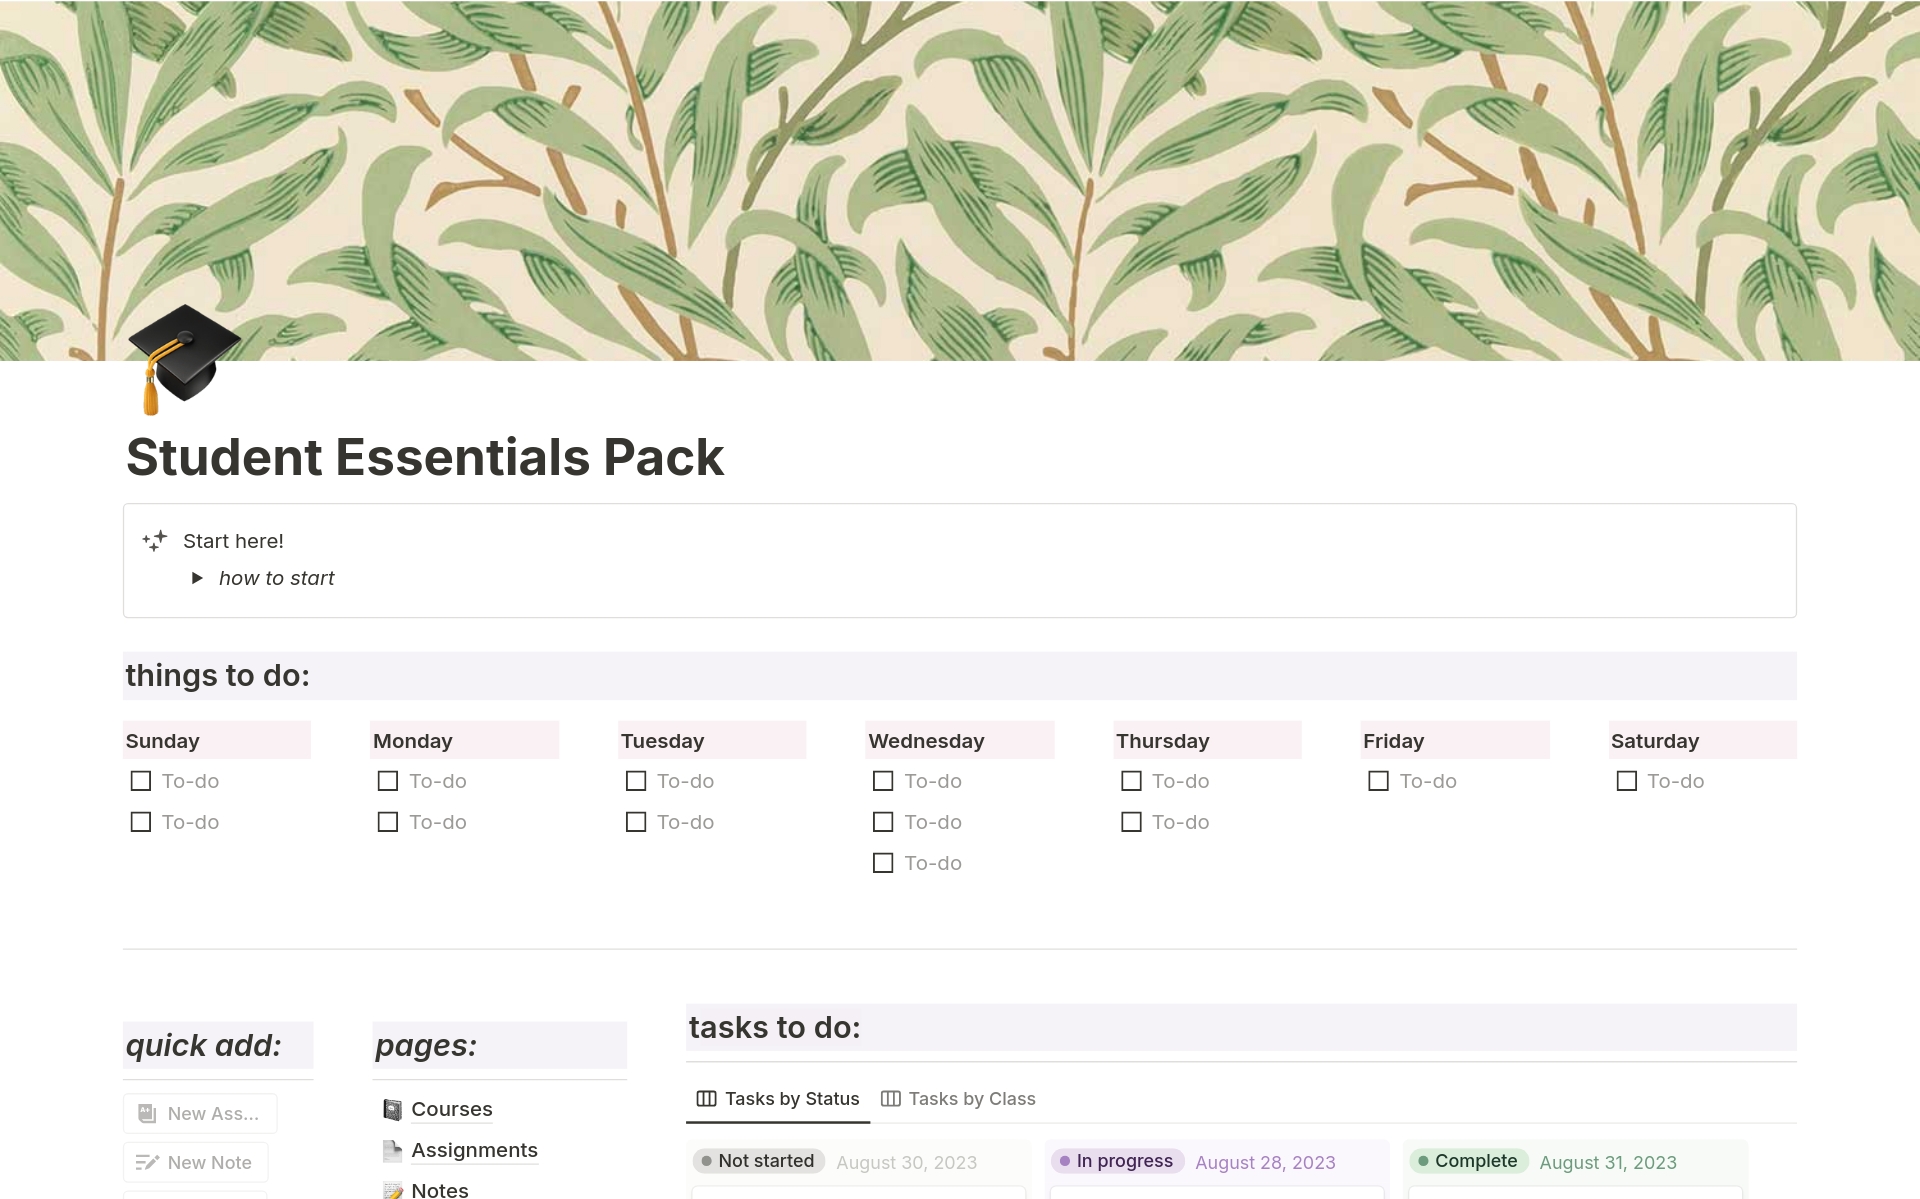 The College Student Essential Pack is perfect for students who want to organize, plan, and study for their college classes, all in one place!